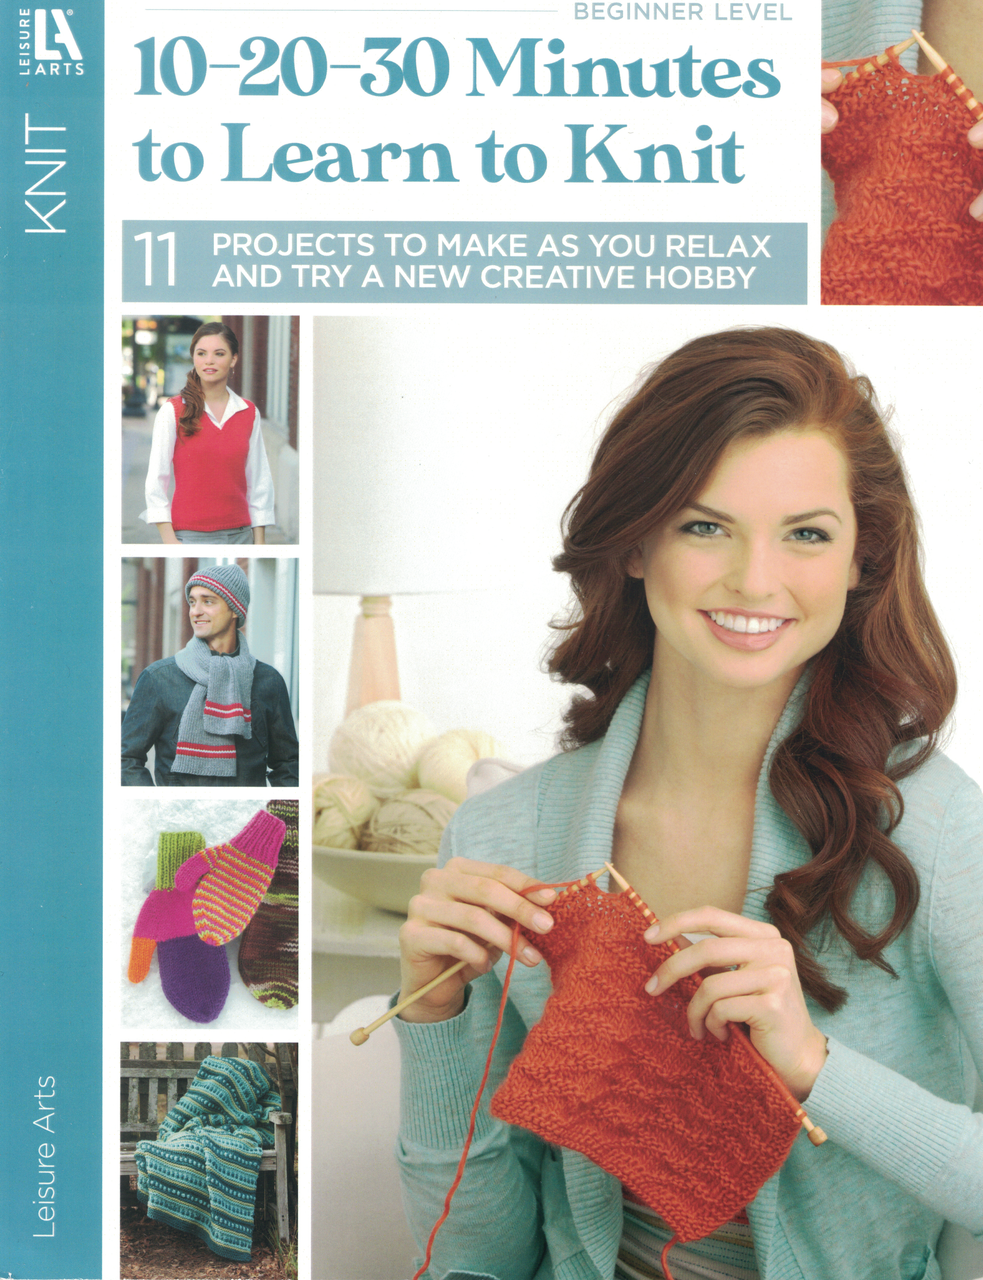 Learn to Loom Knit with a Circular Loom - Leisure Arts